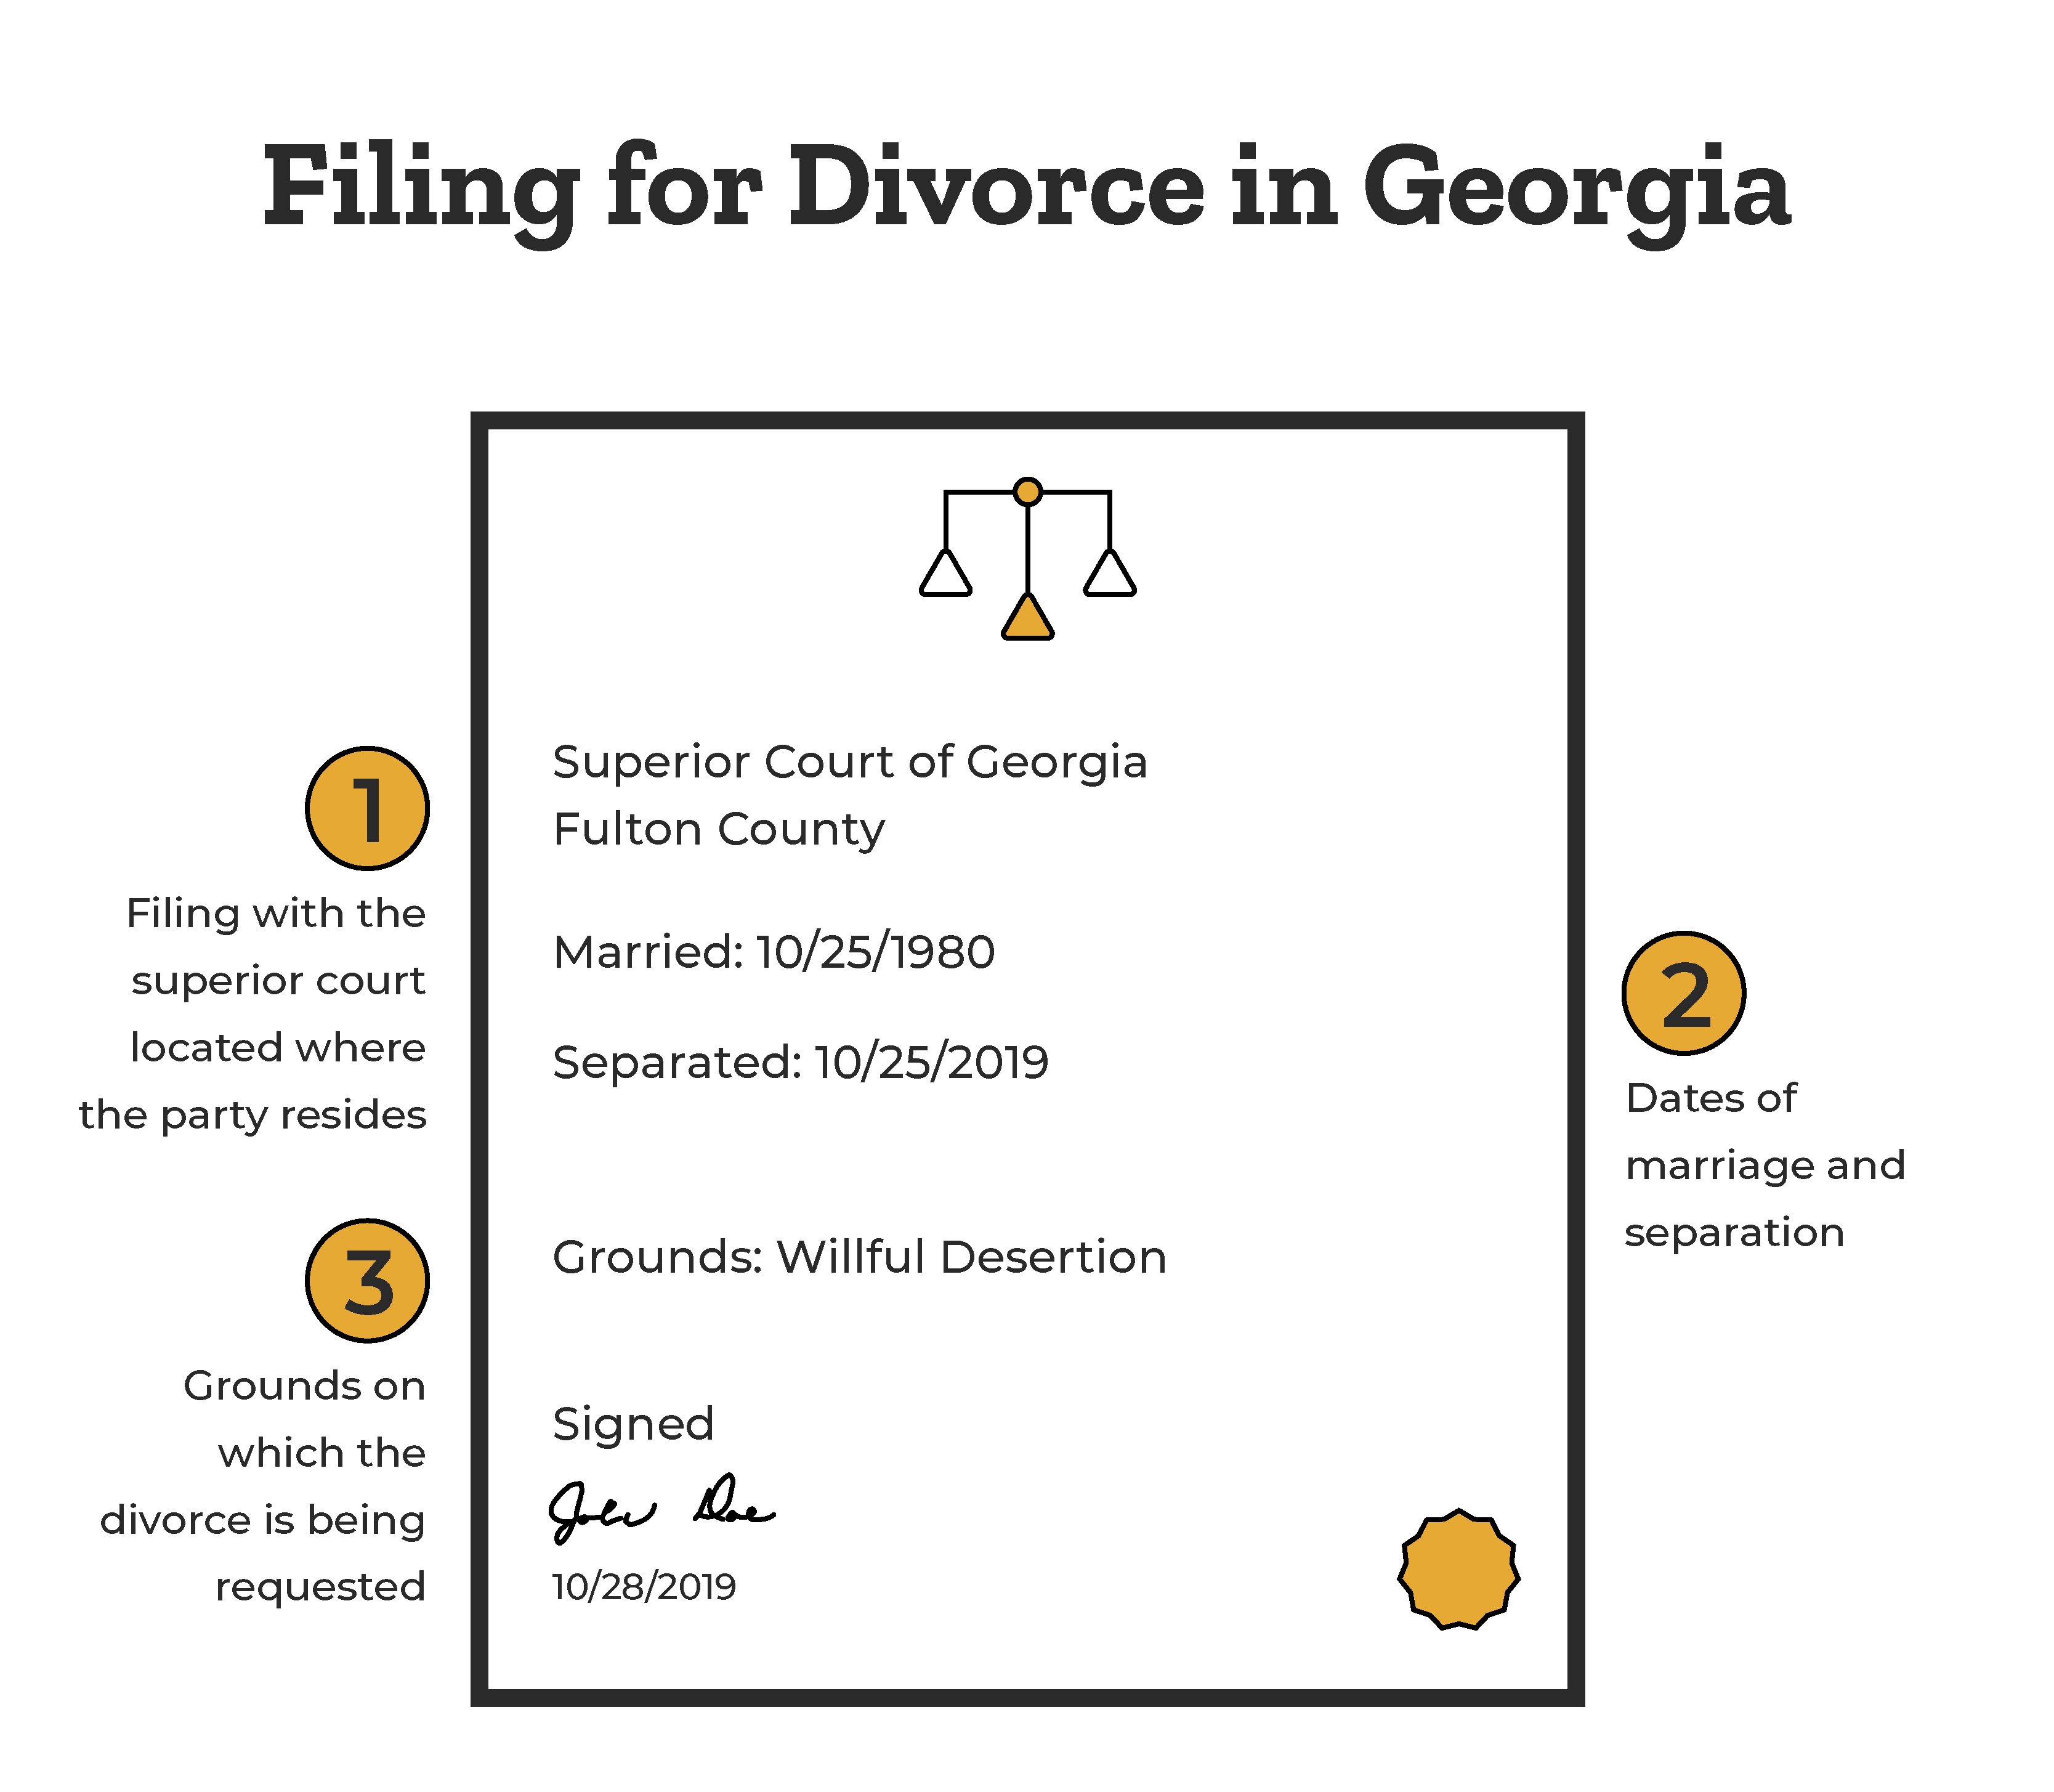 requirements-for-filing-for-divorce-superior-court-dates-grounds